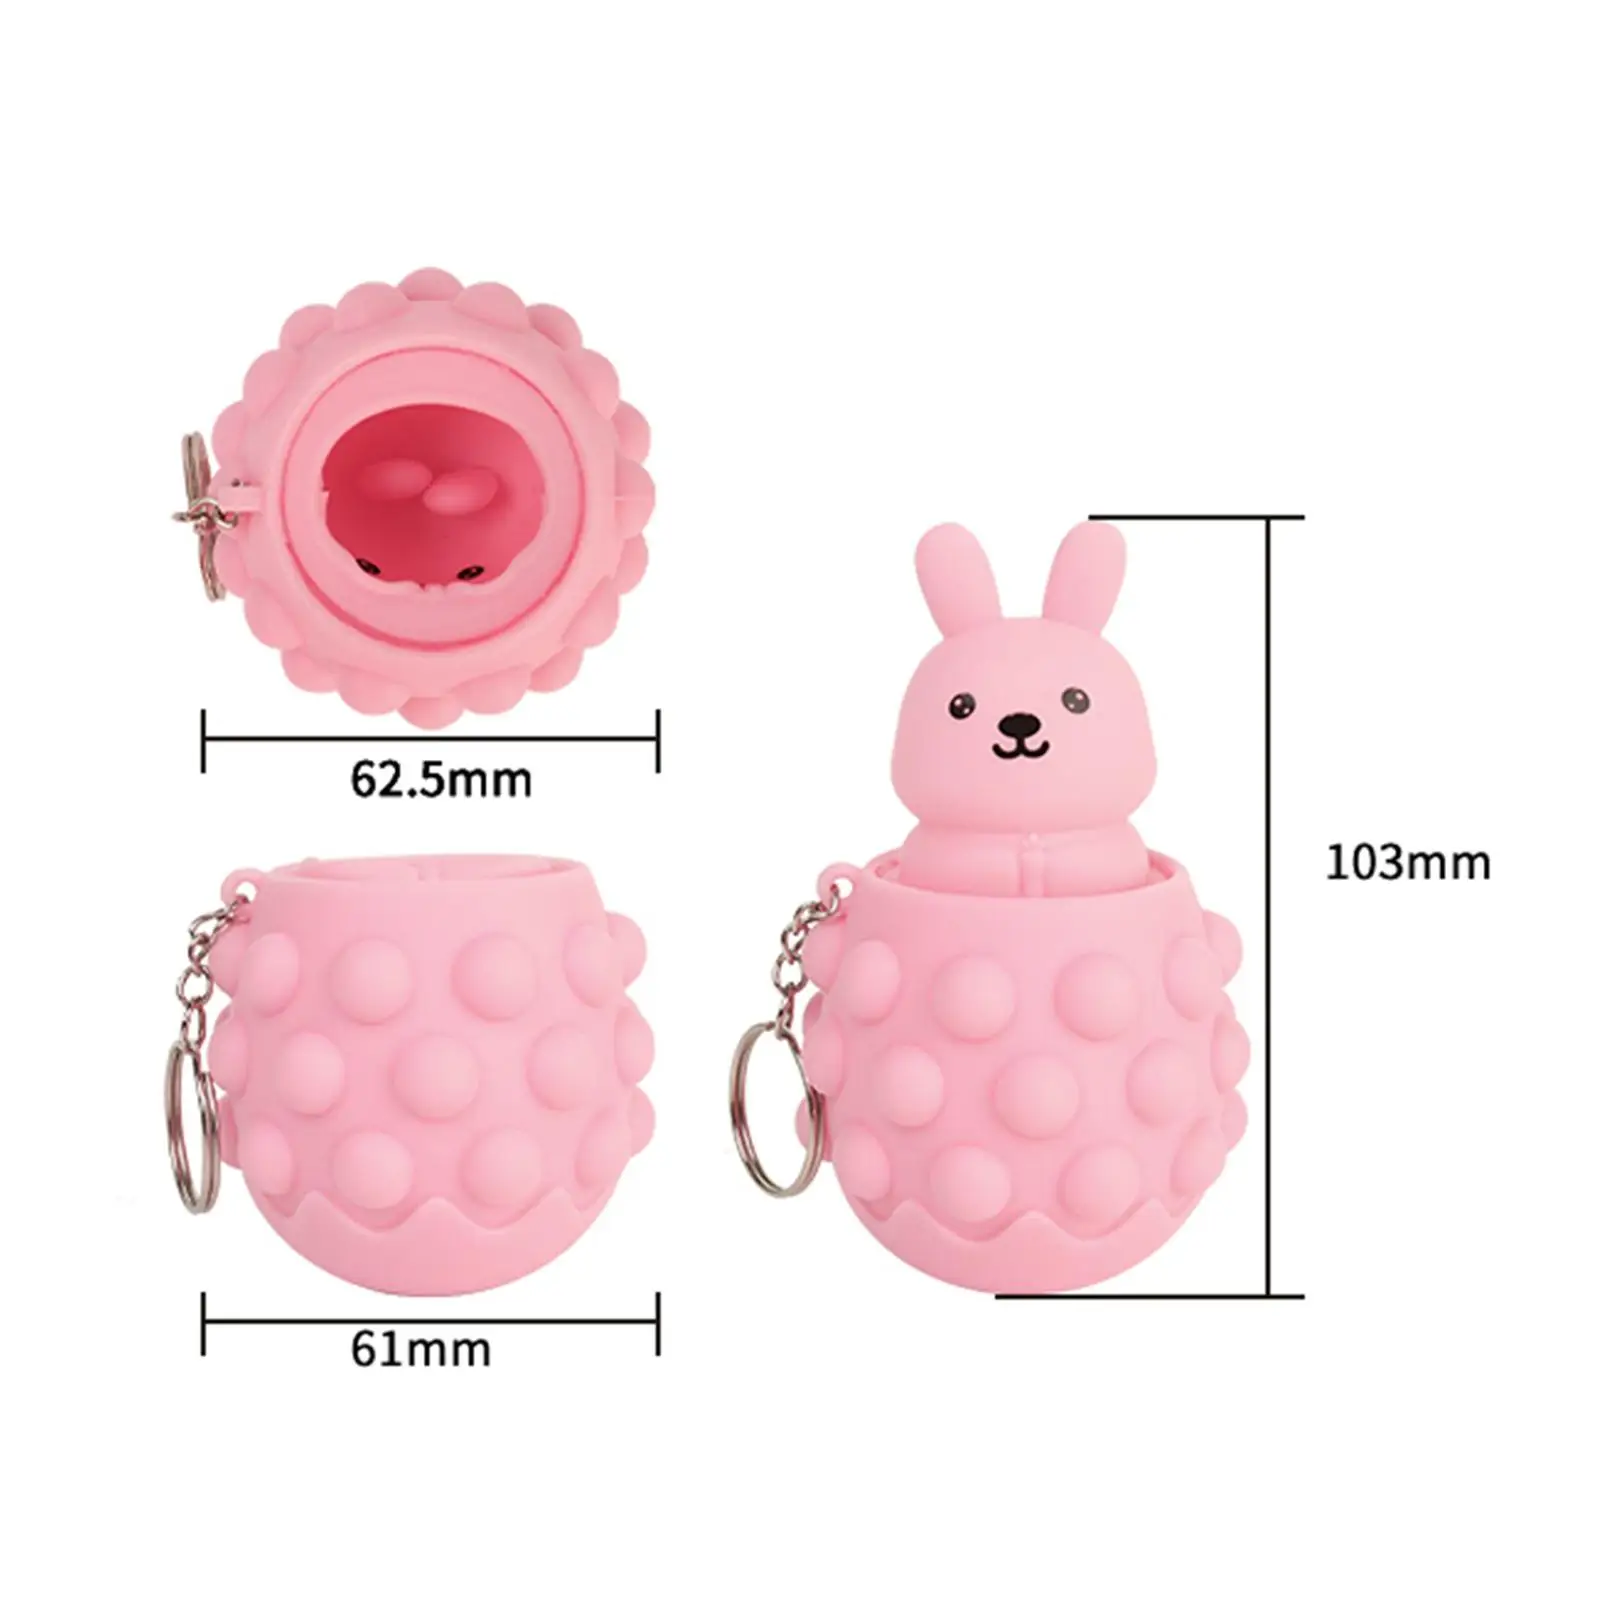 Squishy Animal Antistress Toys Squeeze Soft Abreact Vent Toys Stress Relief